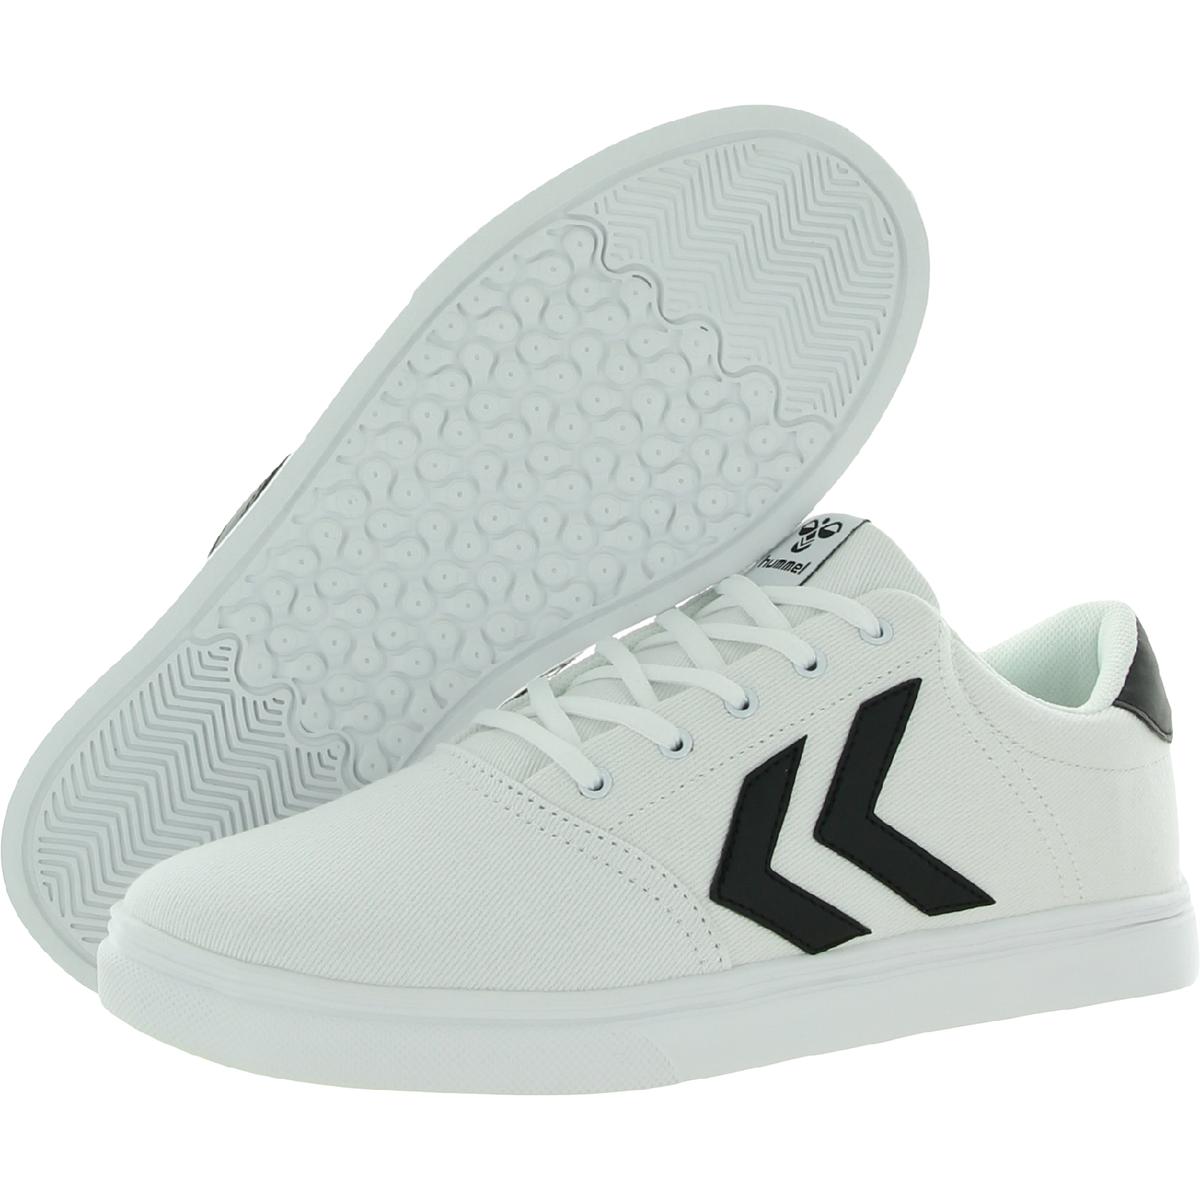 Kejserlig mynte Svig Hummel Mens Essen Low Top Canvas Casual and Fashion Sneakers Shoes BHFO  3960 | eBay